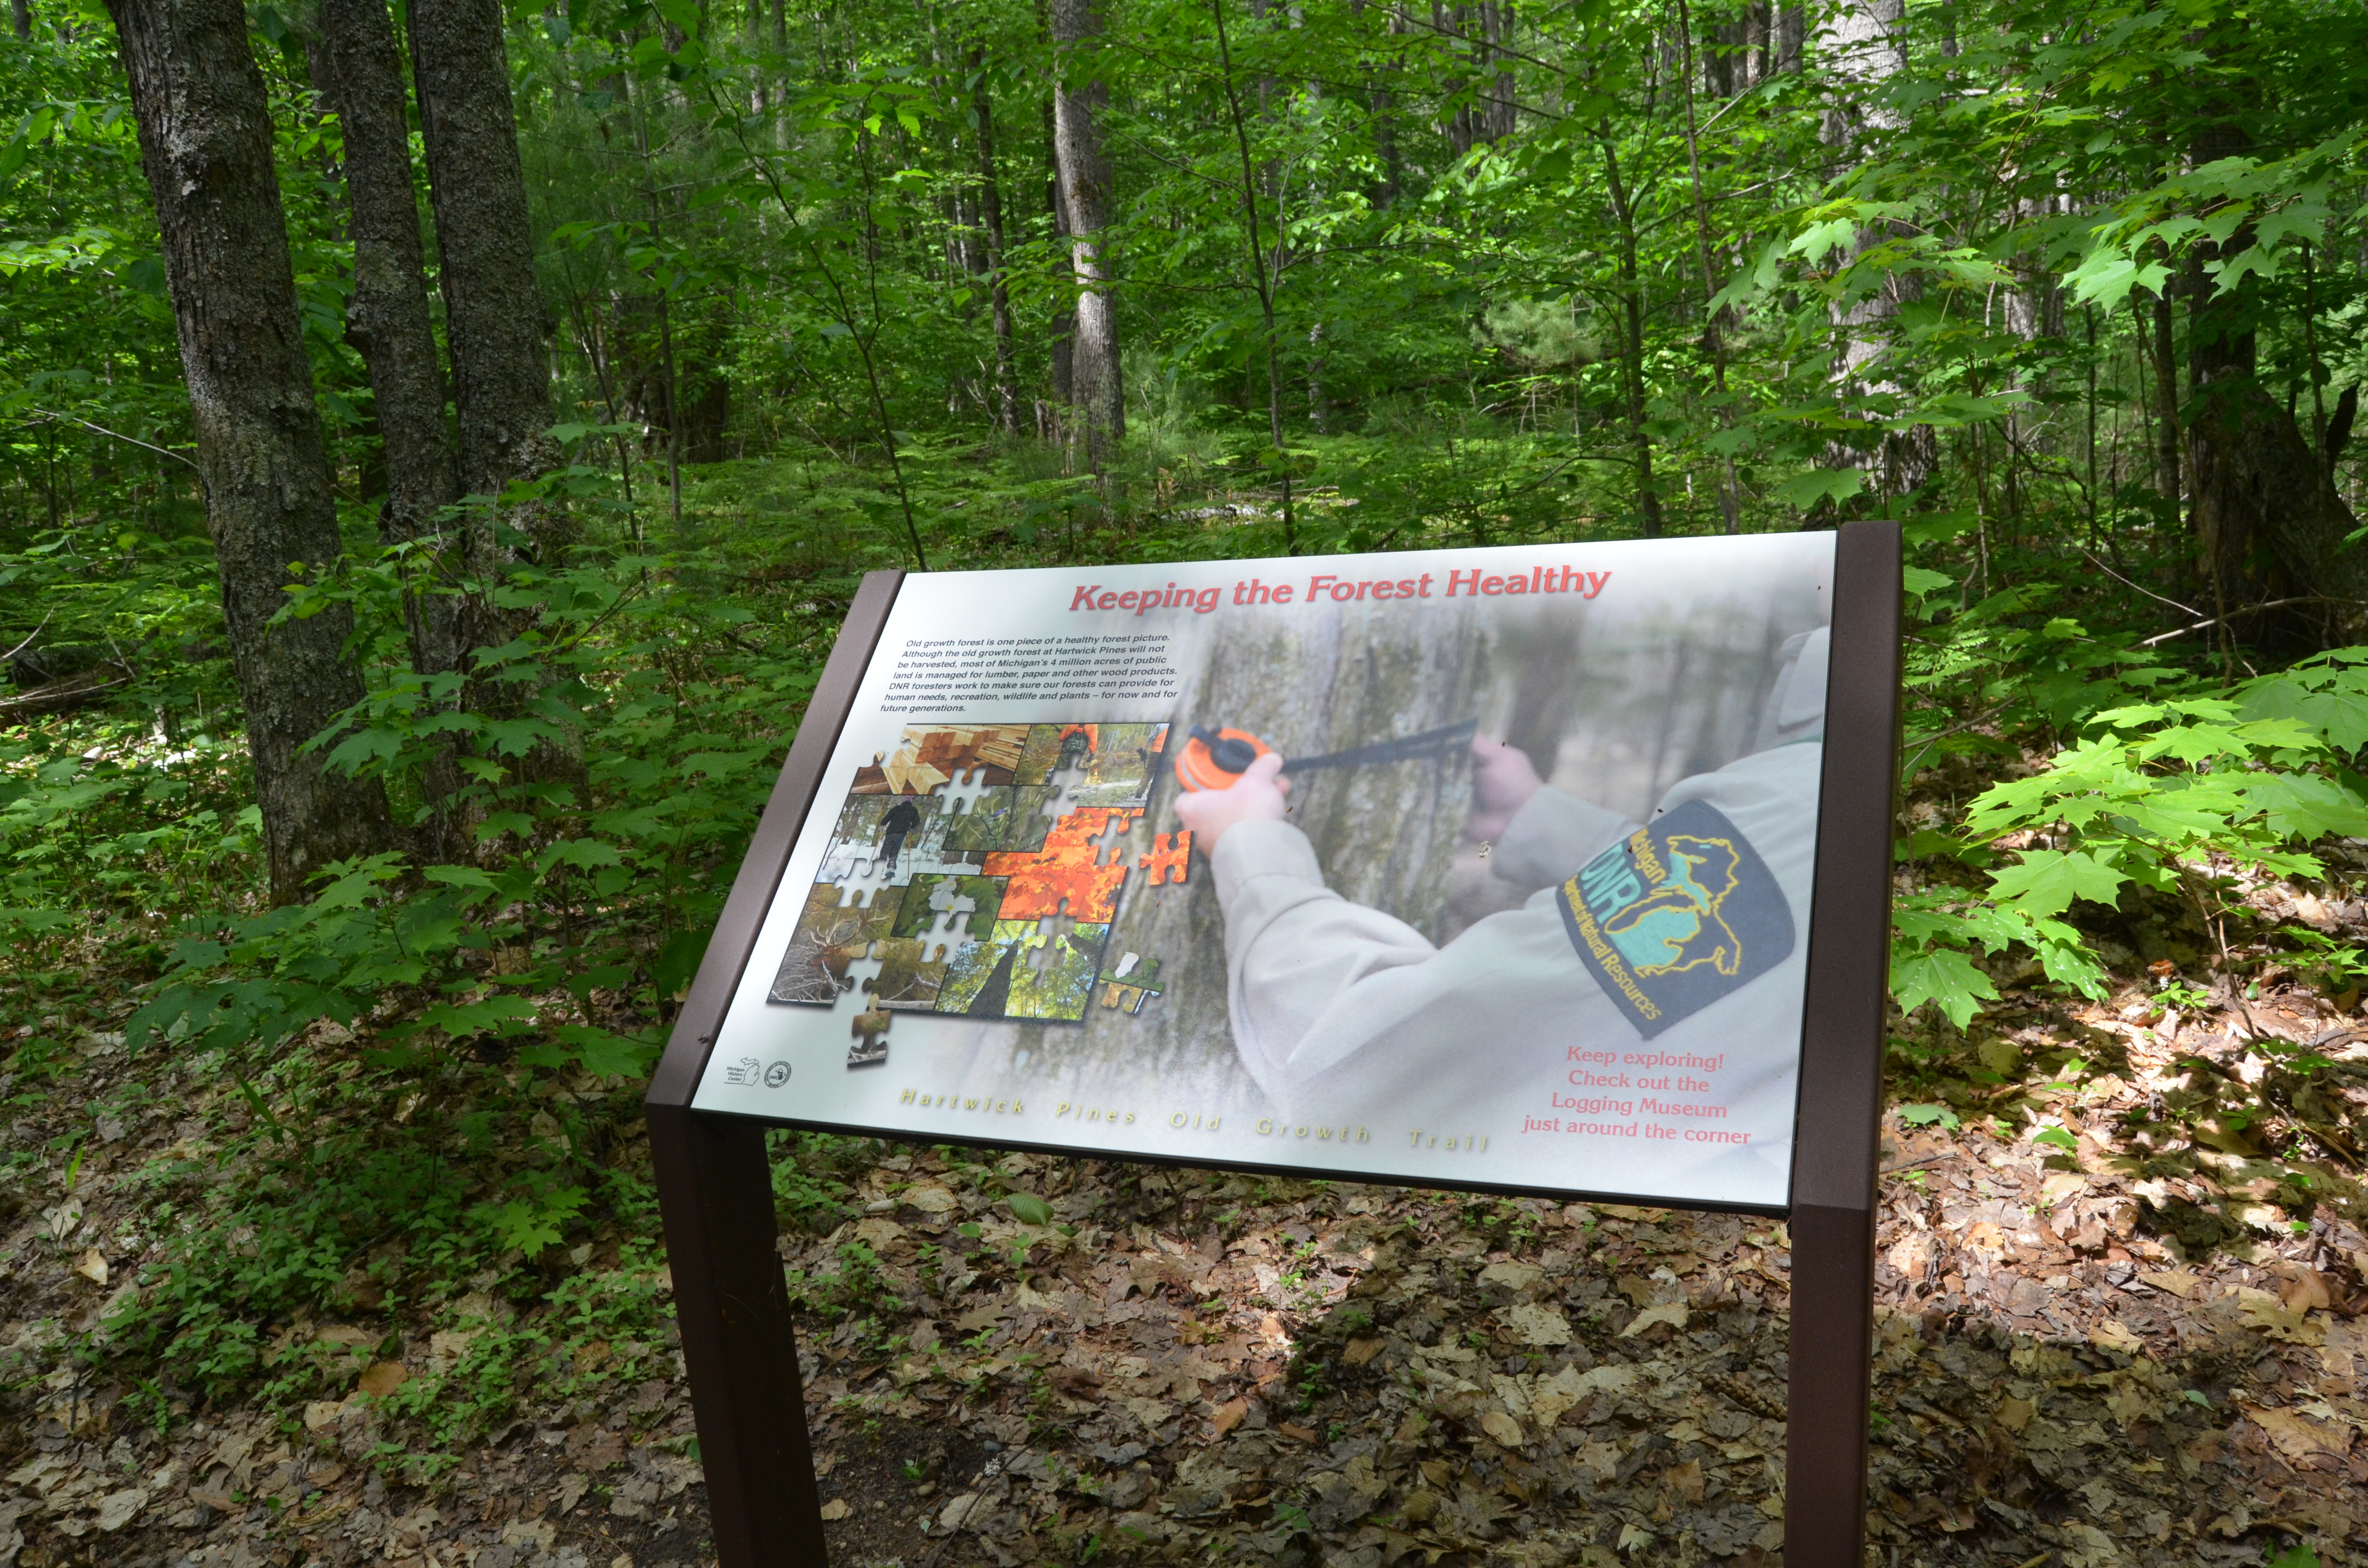 Hartwick Pines State Park Keeping Forest Healthy